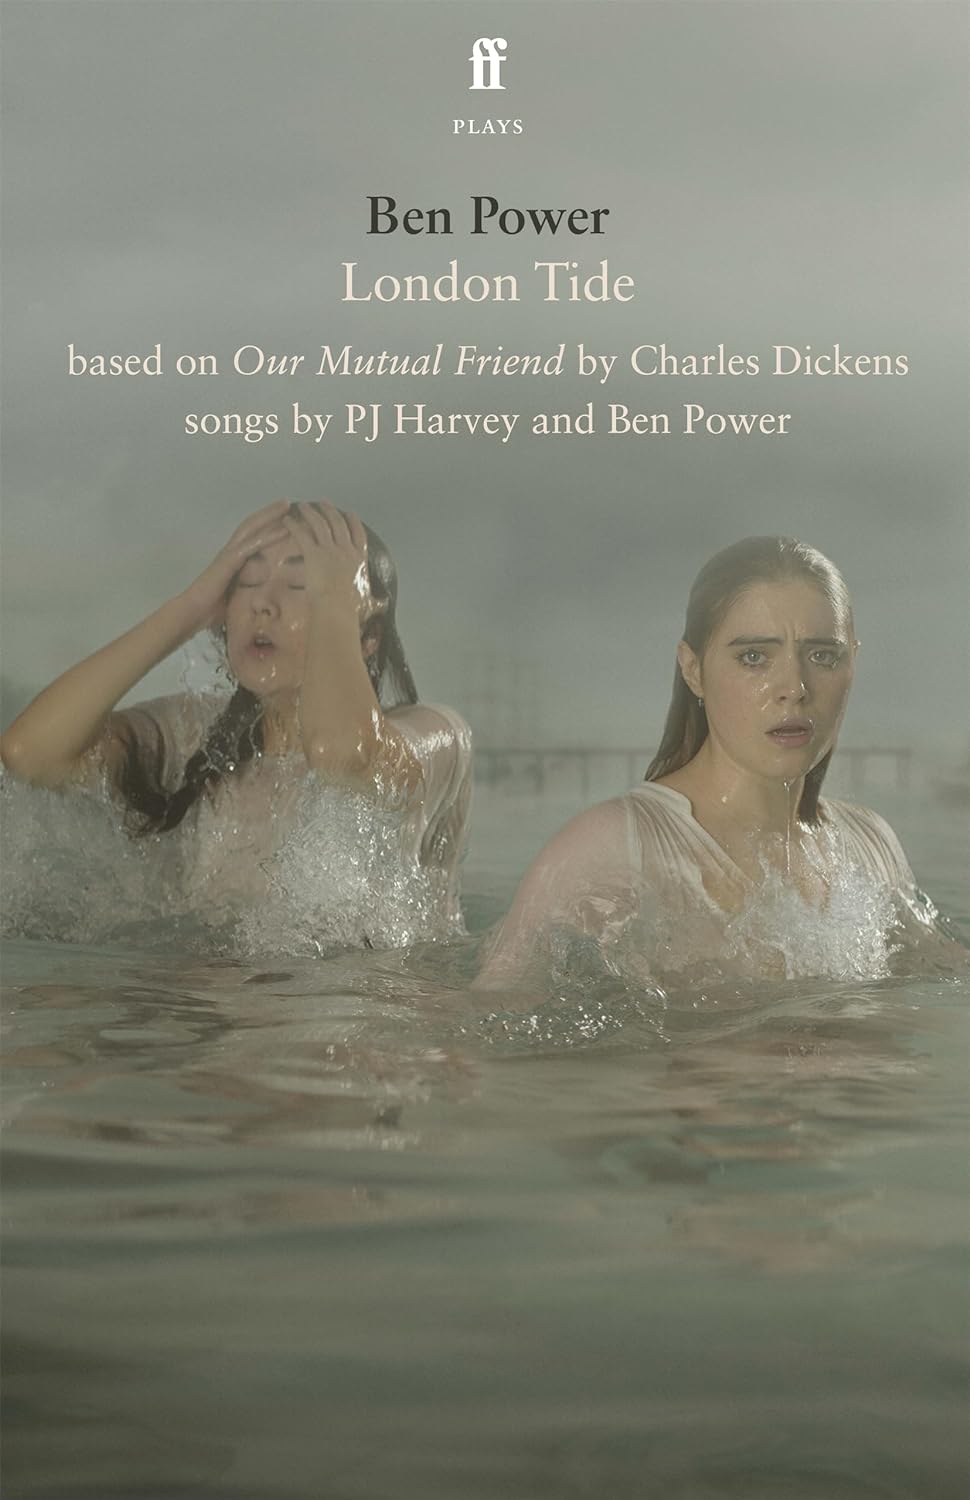 London Tide: based on Our Mutual Friend by Charles Dickens